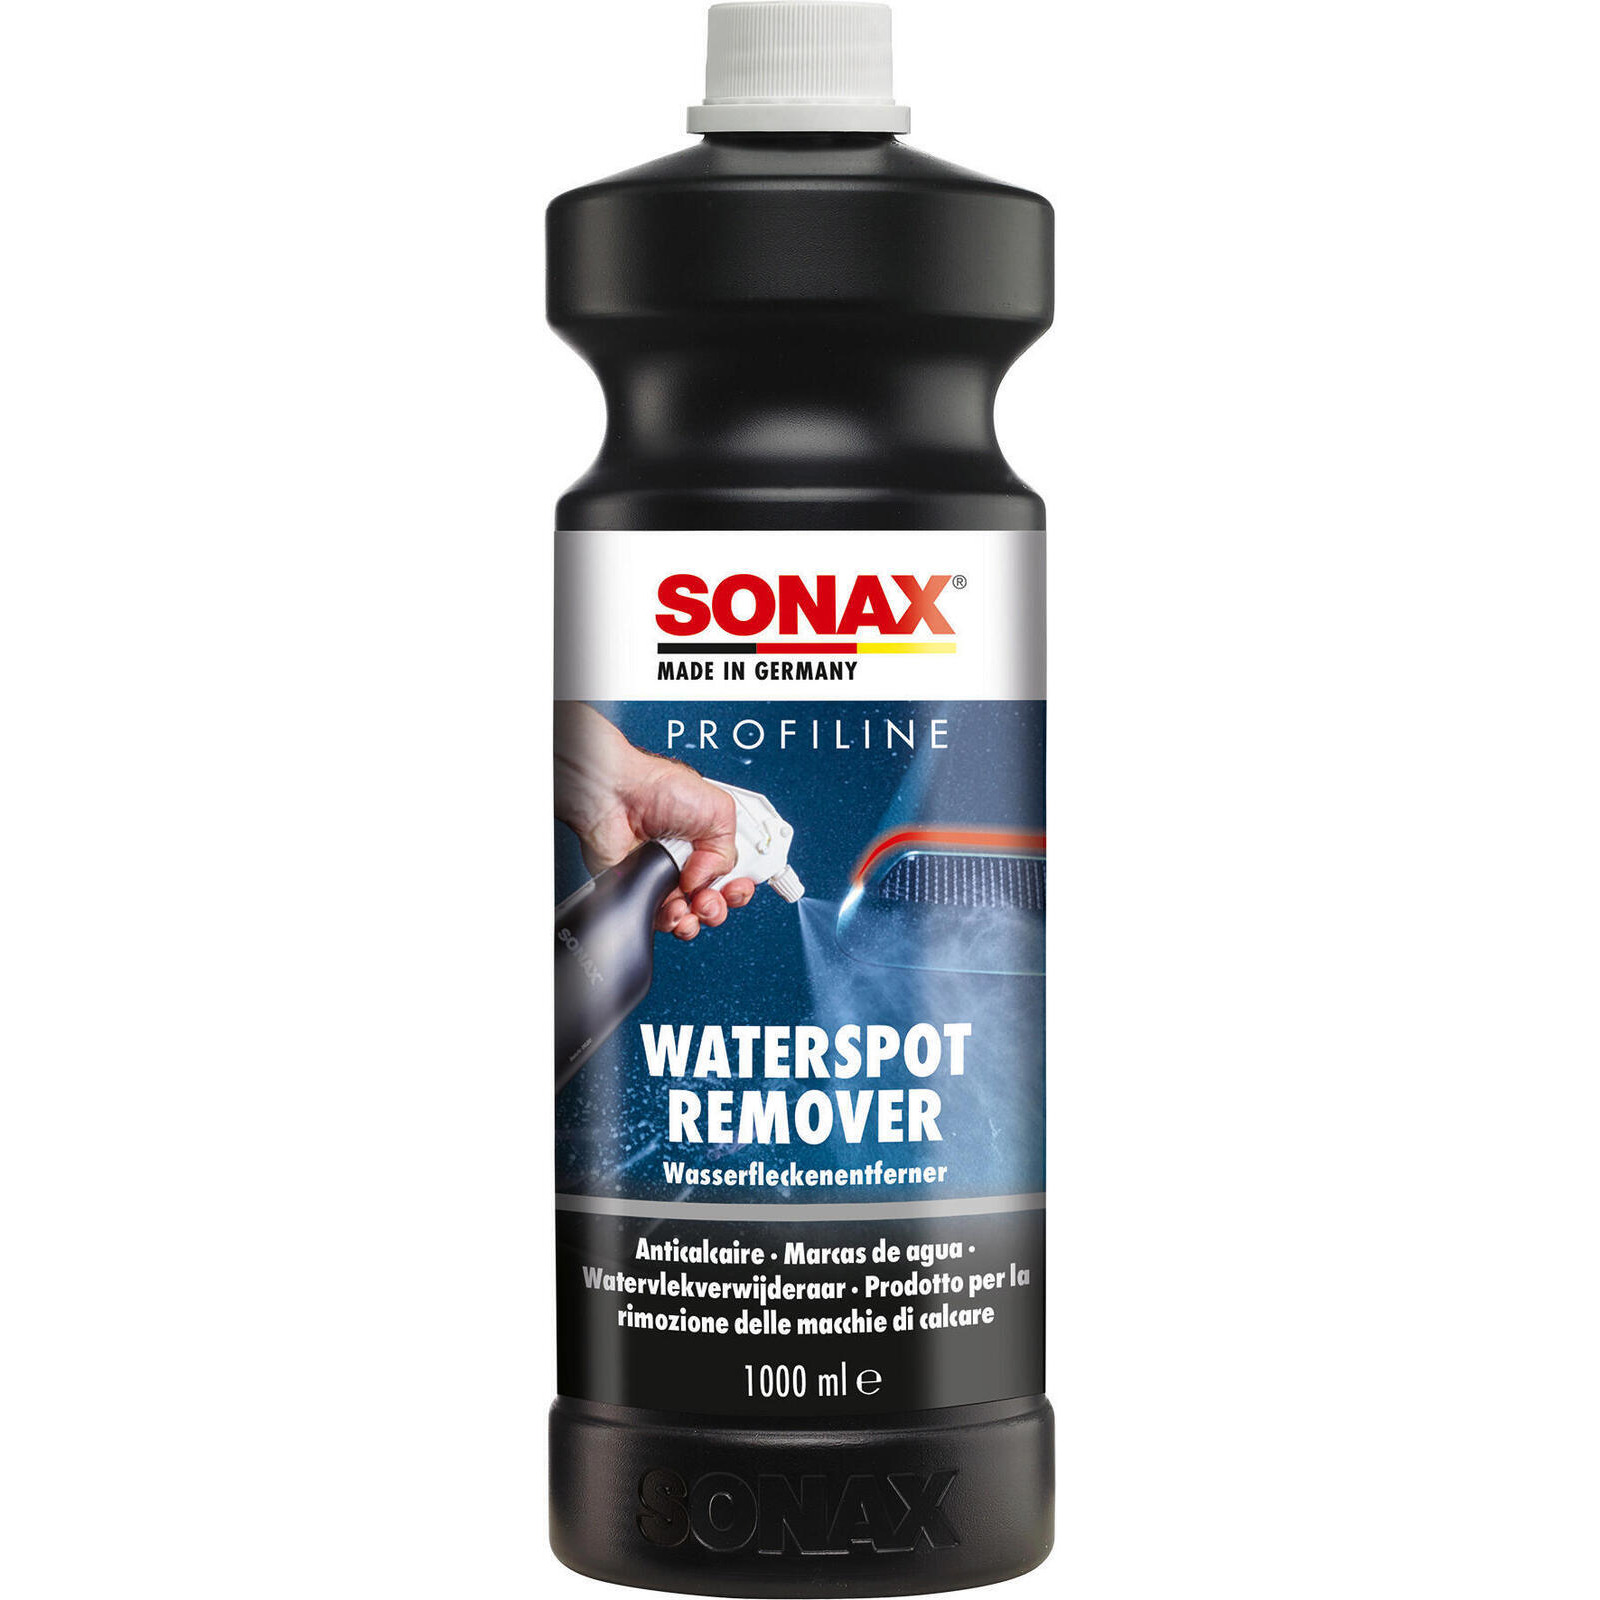 SONAX Paint Cleaner PROFILINE Waterspot Remover